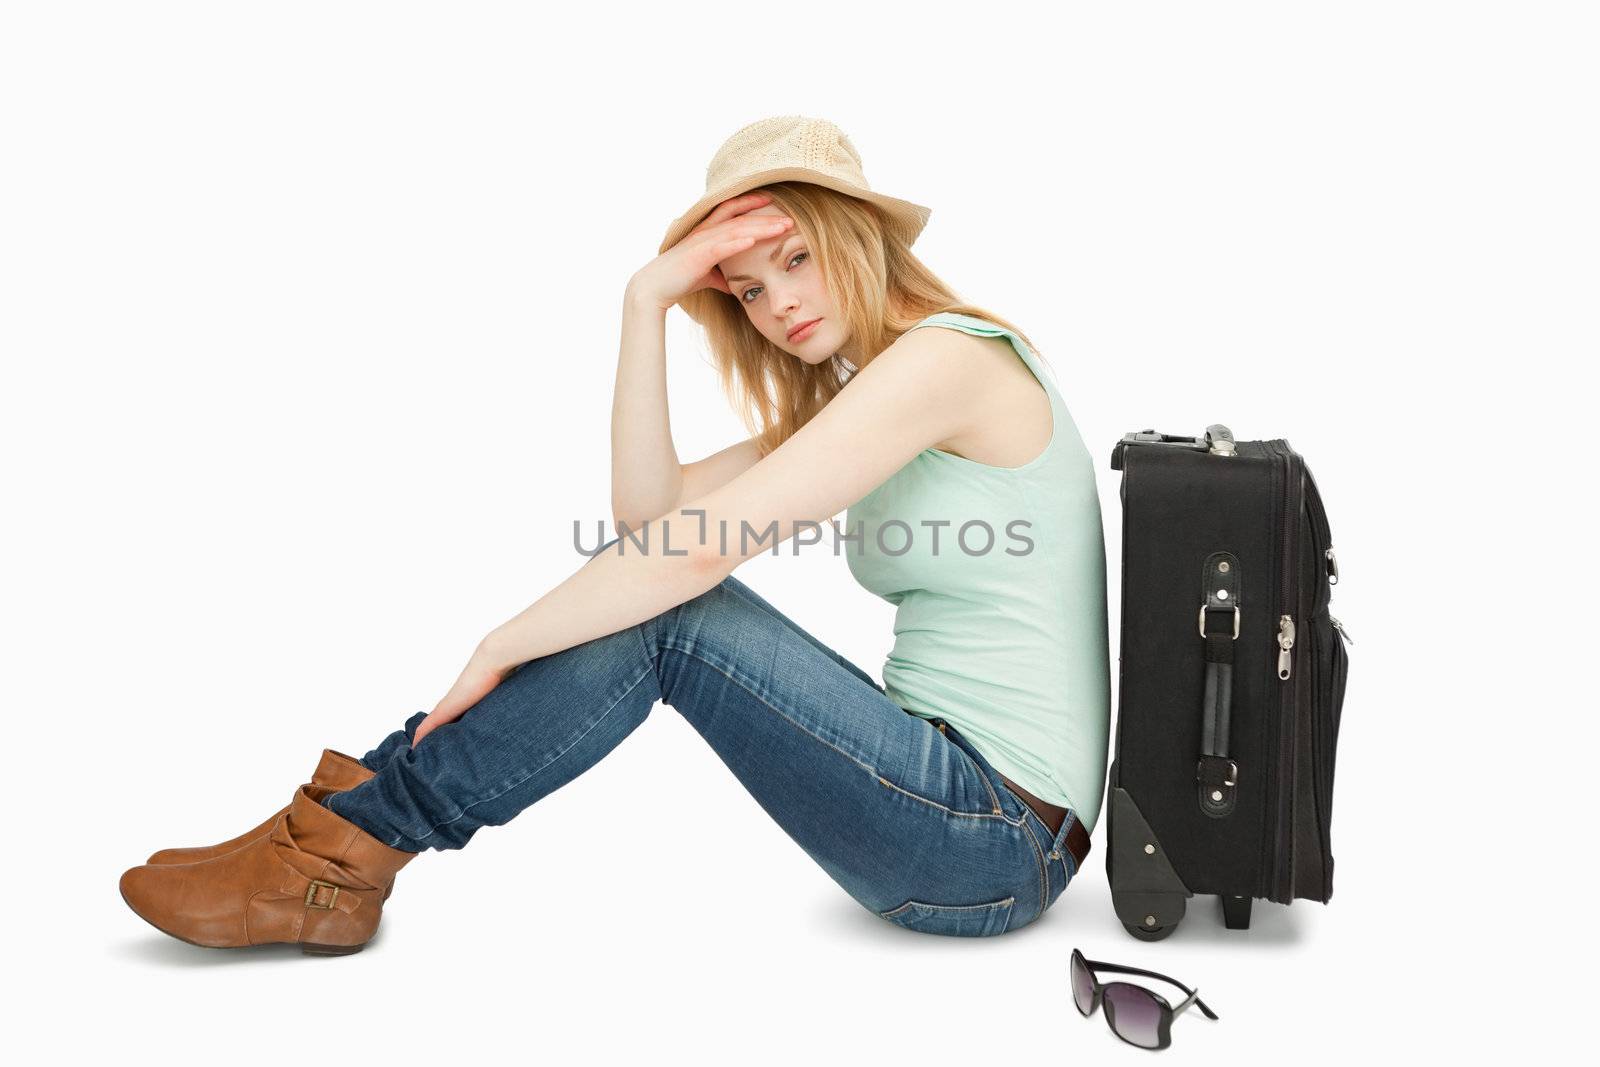 bored woman sitting near a suitcase against white background